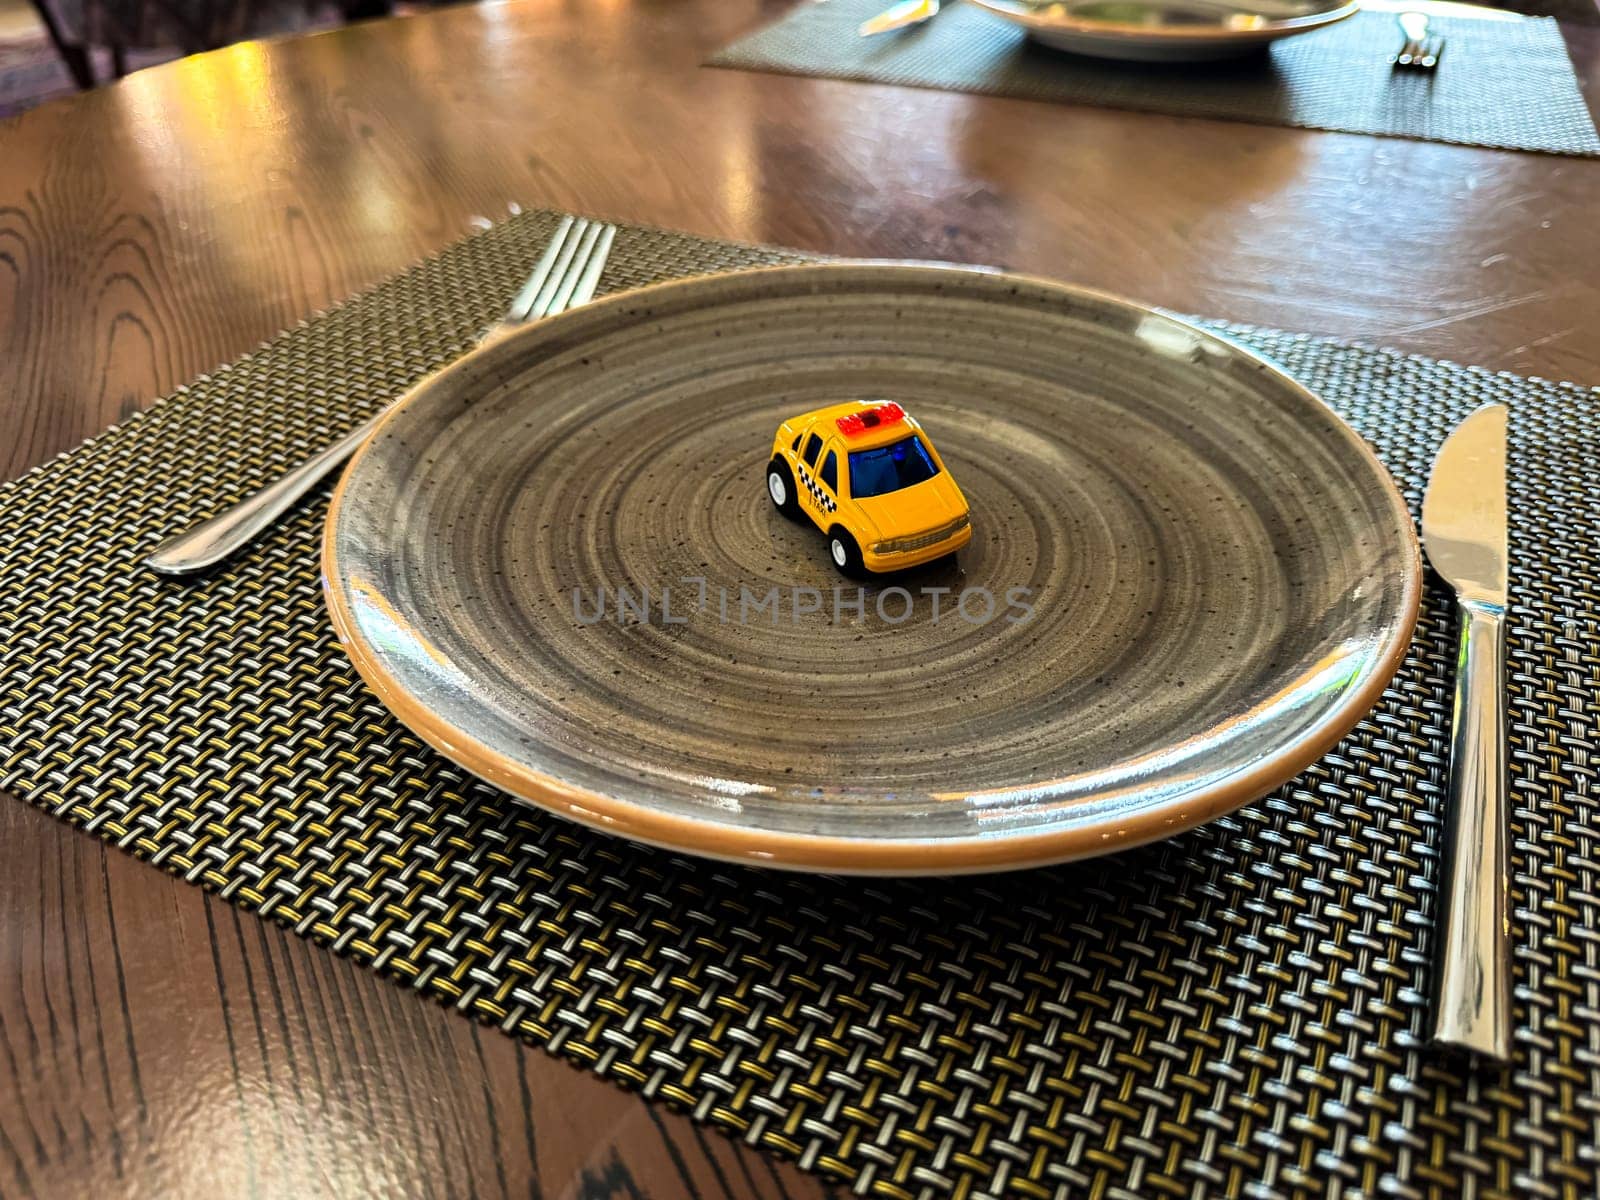 Miniature taxi toy on ceramic plate with cutlery. Concept of calling taxi after end of banquet or celebration. Design of taxi advertising, culinary presentations and unusual concepts. by Lunnica